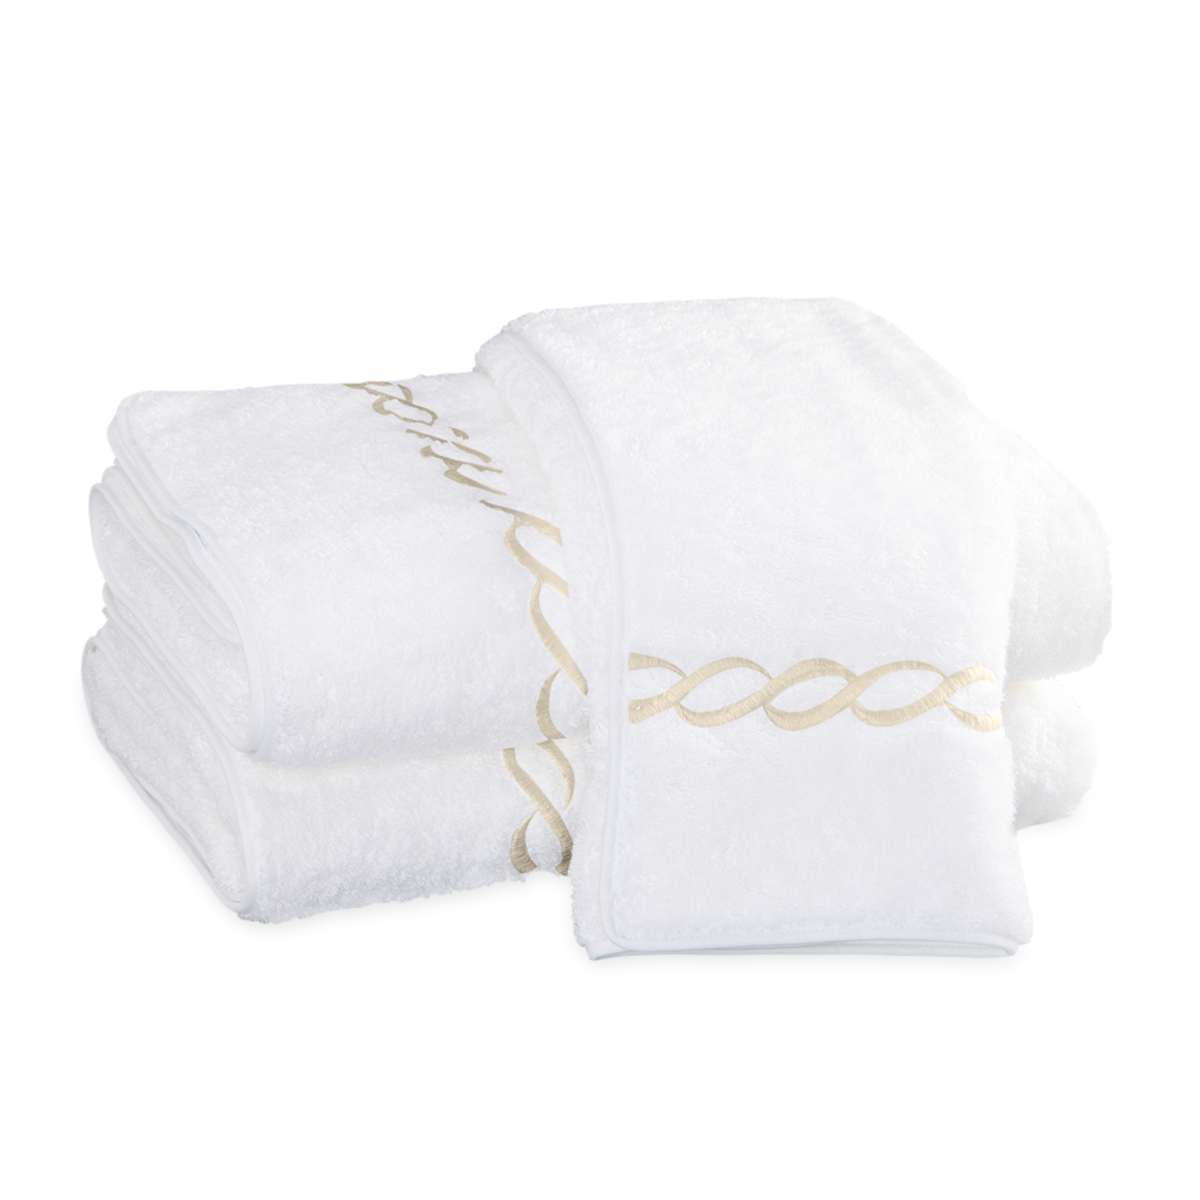 Folded Matouk Classic Chain Bath Towels in Color Ivory